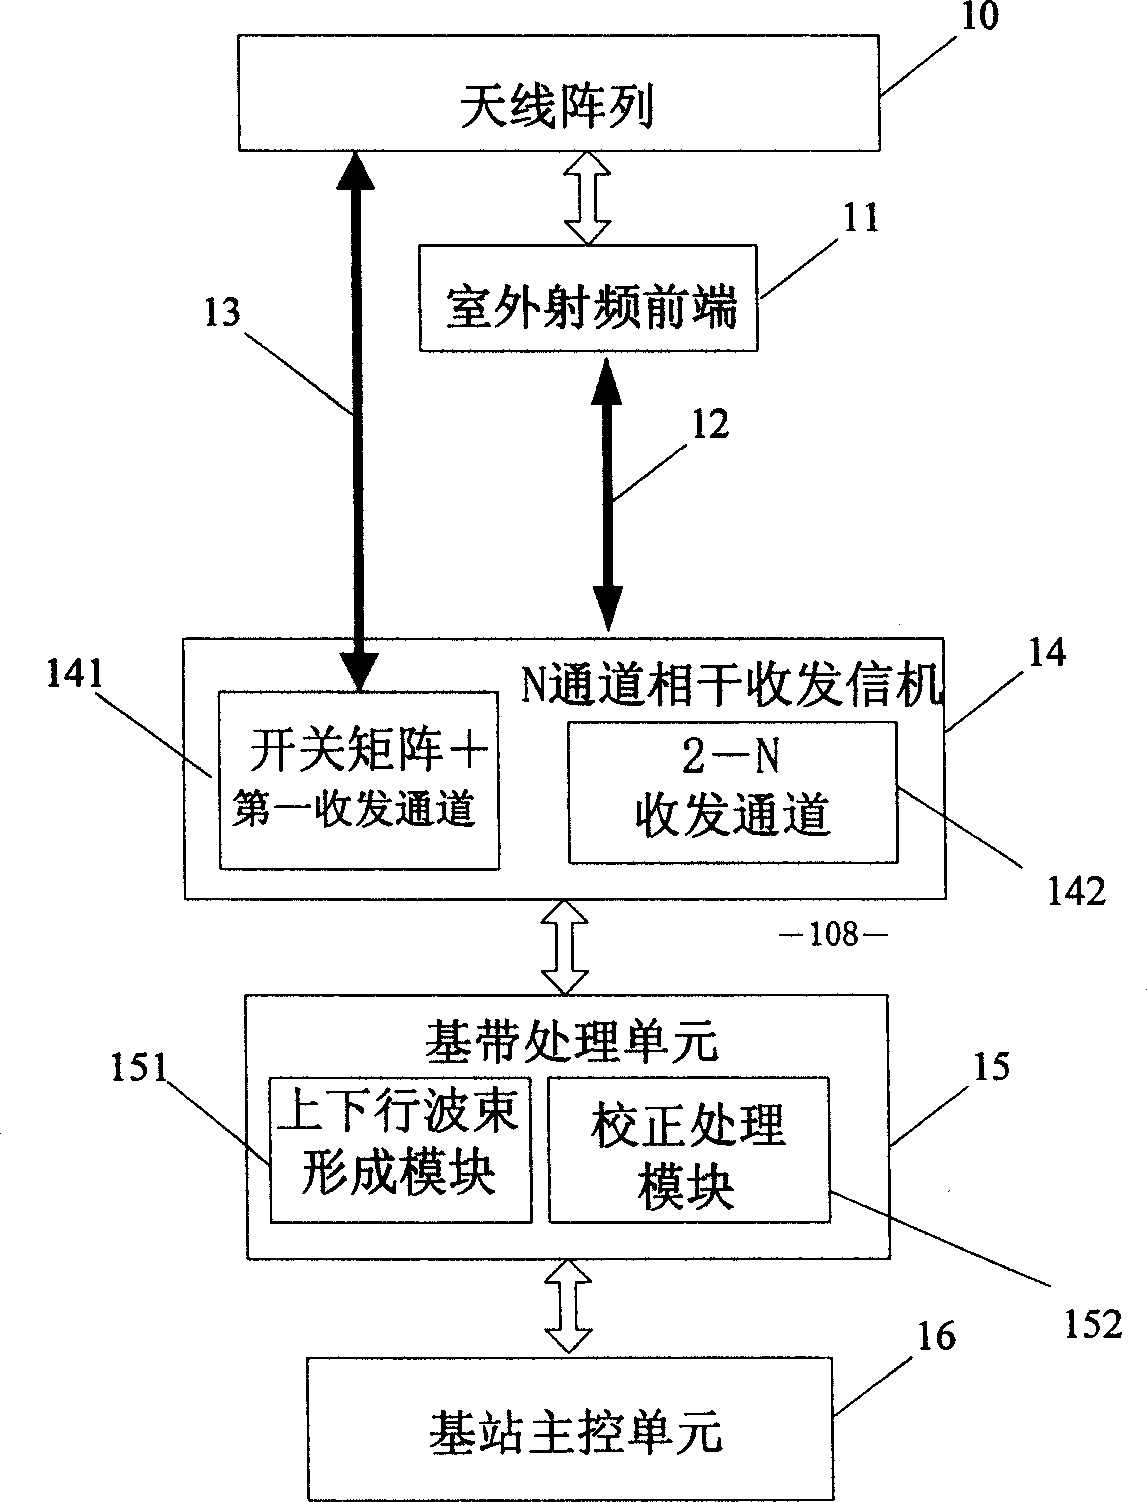 Array channel correcting method and device for time-division and duplex intelligent antenna